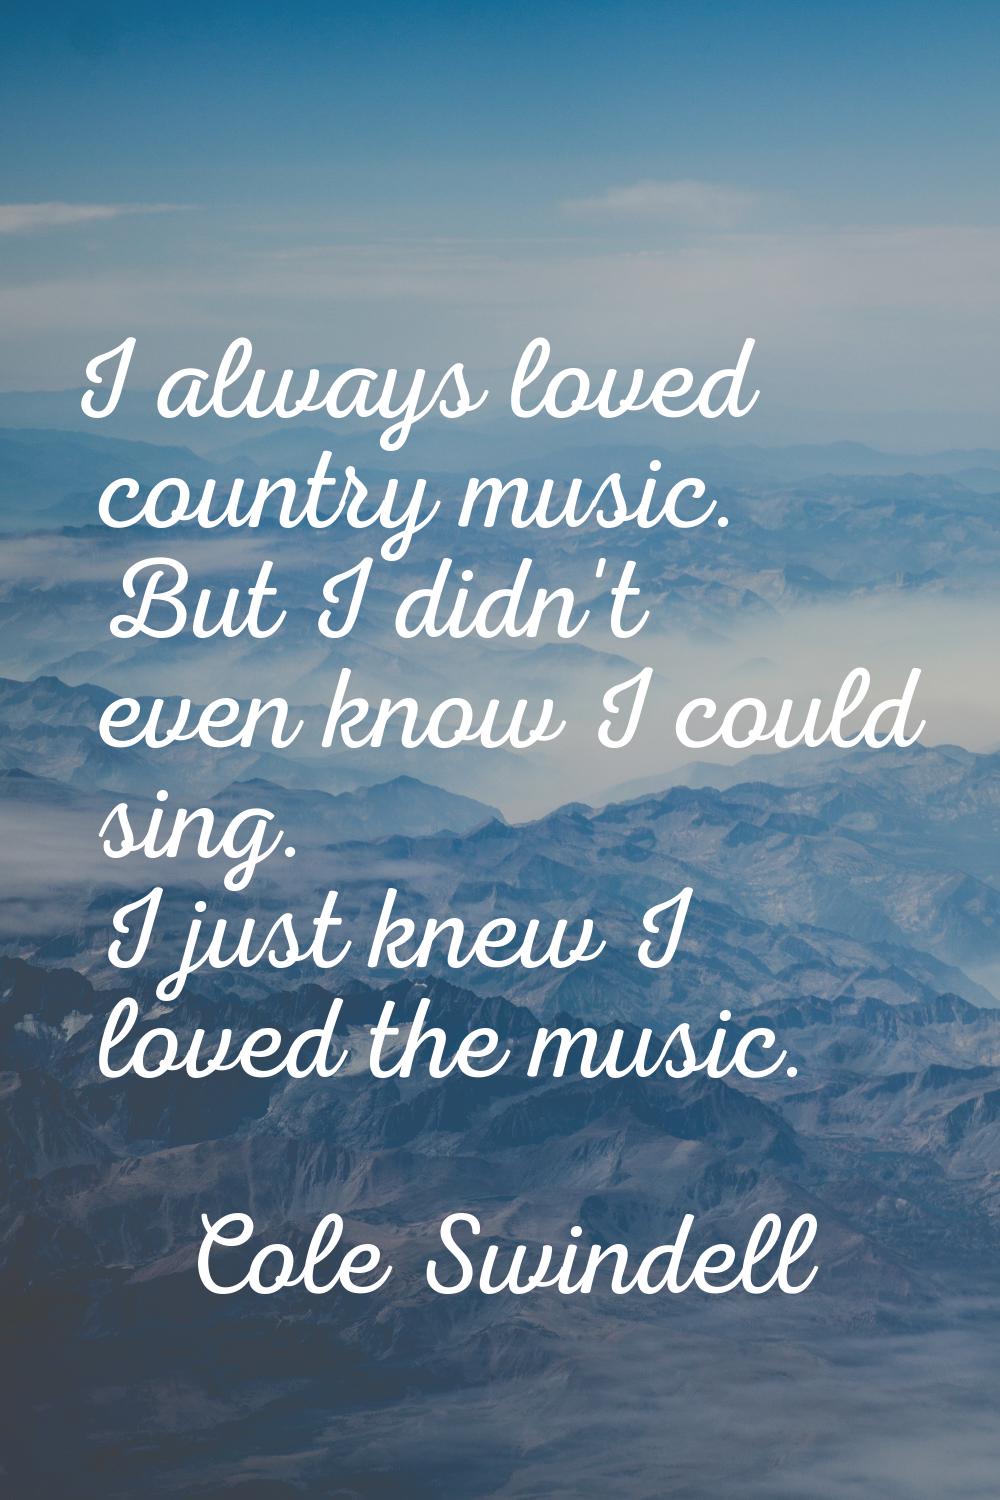 I always loved country music. But I didn't even know I could sing. I just knew I loved the music.